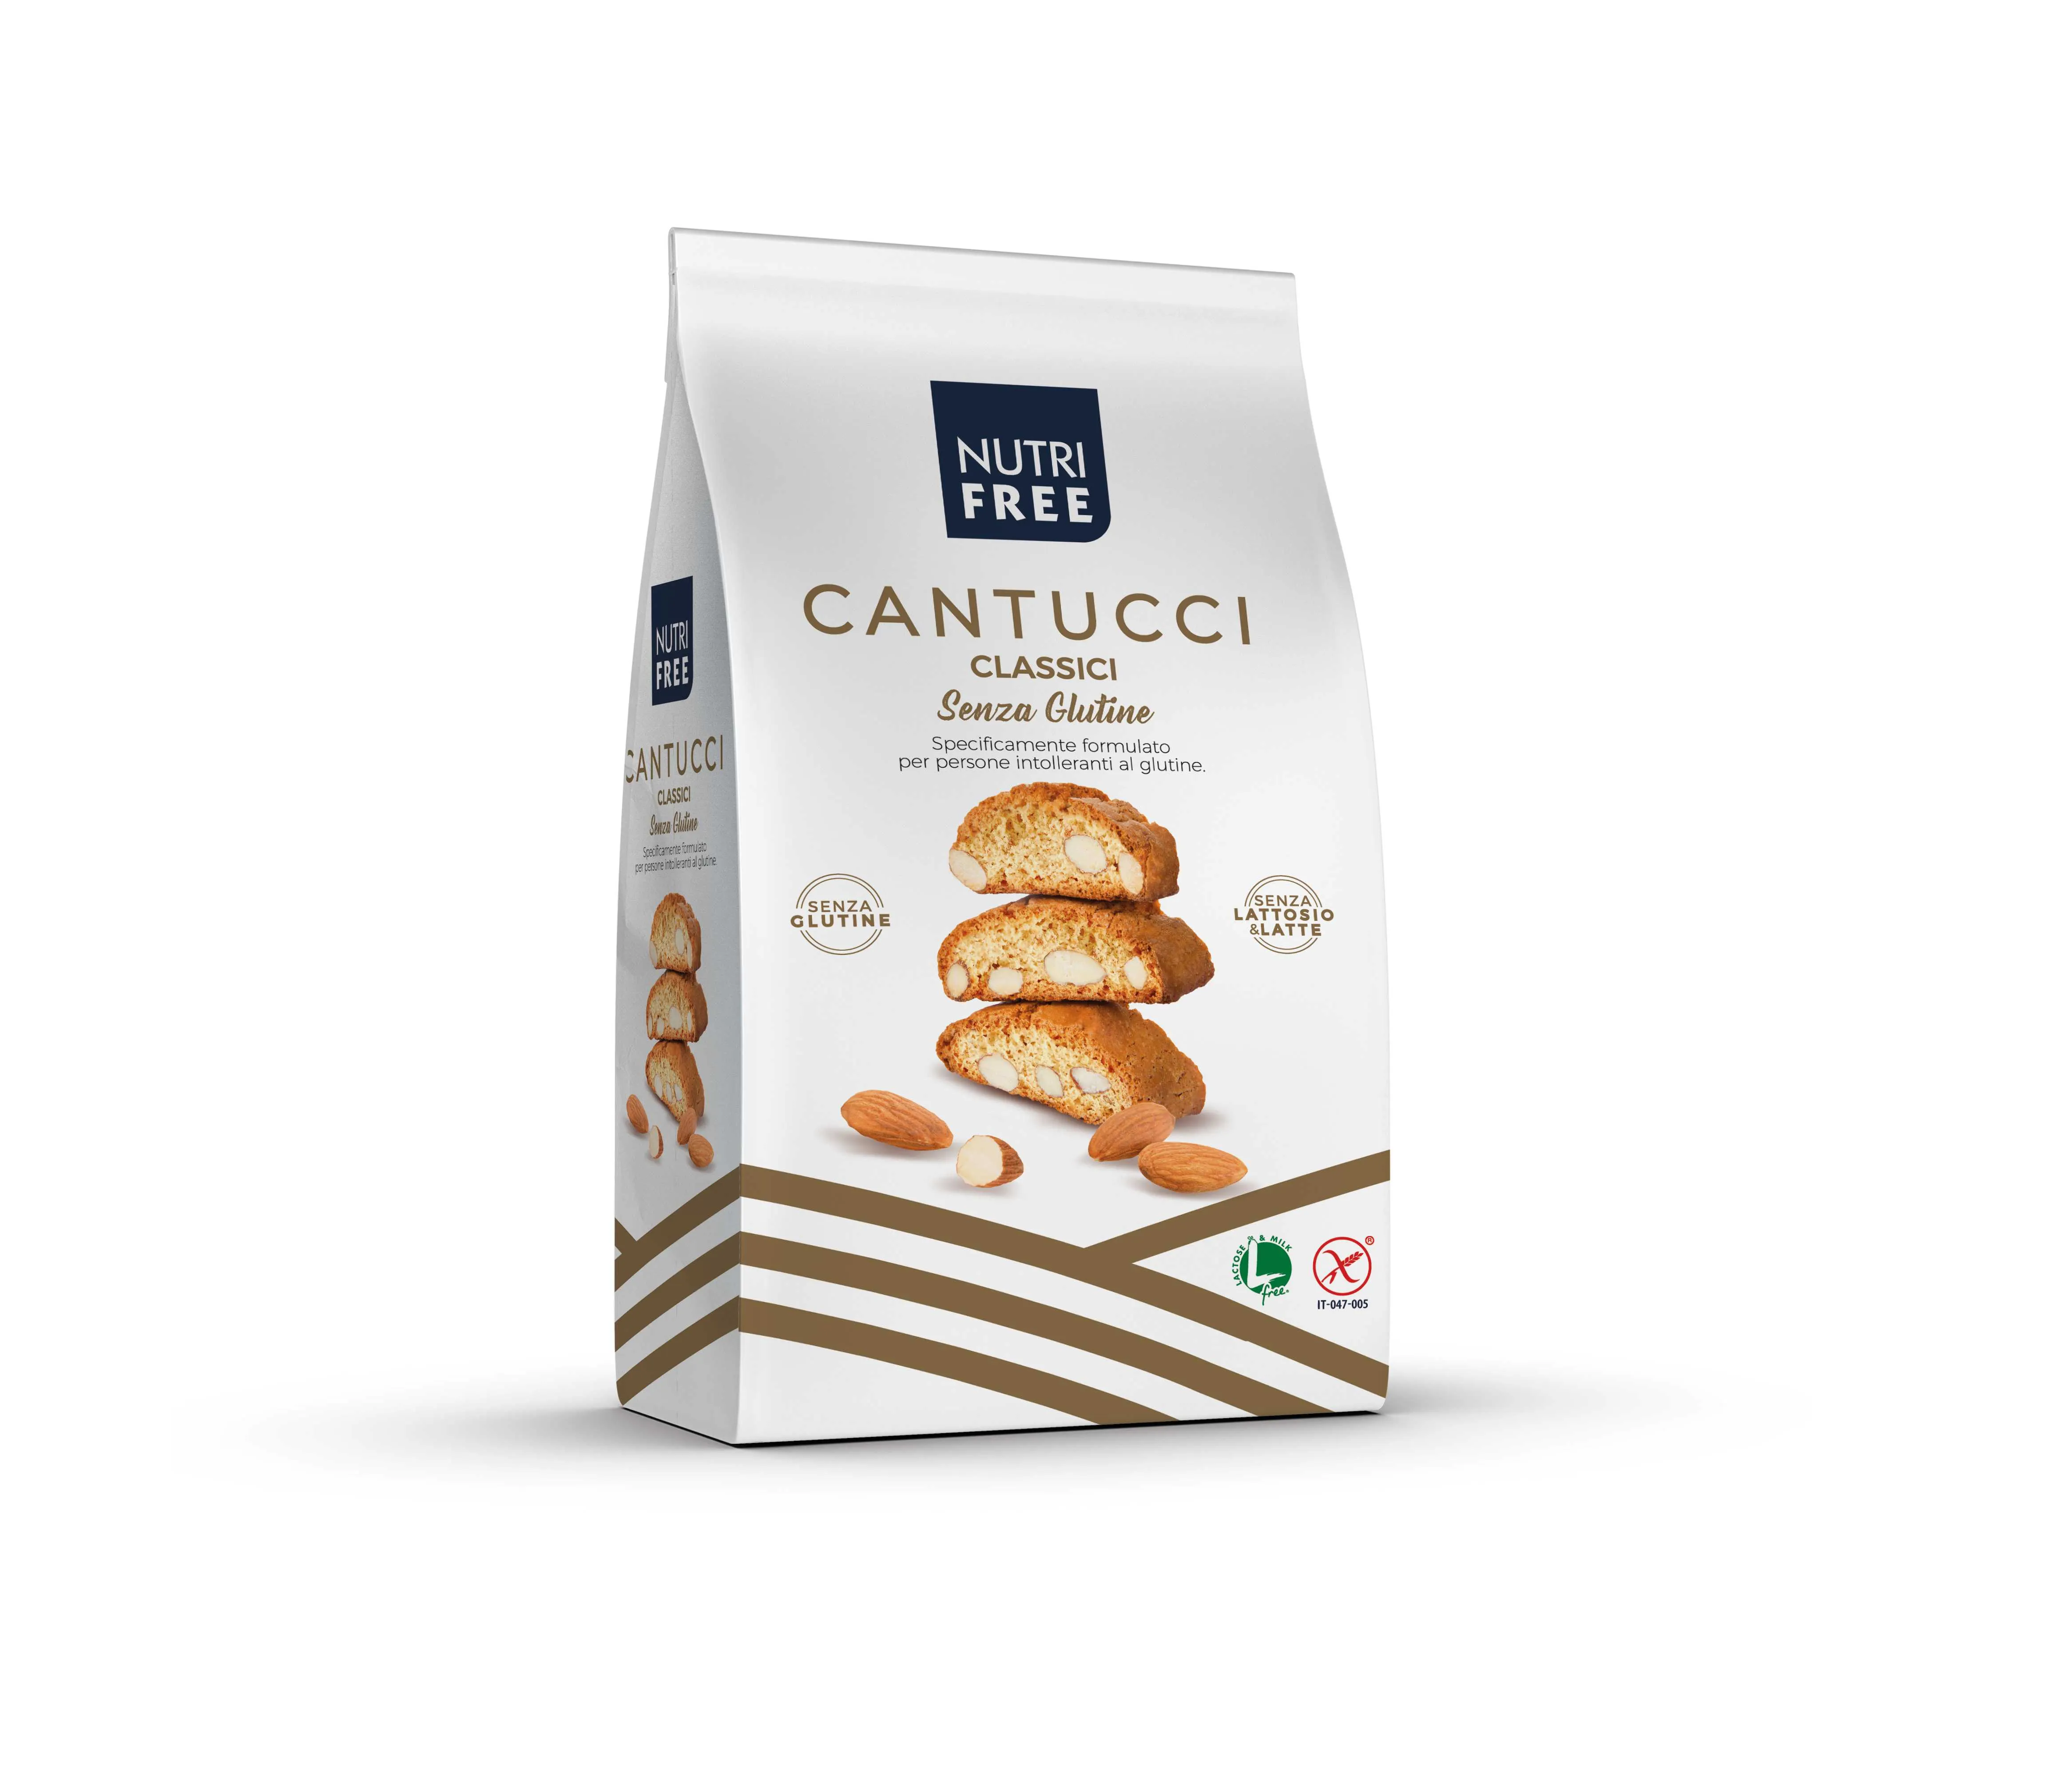 Nutrifree Cantucci mandlove susienky